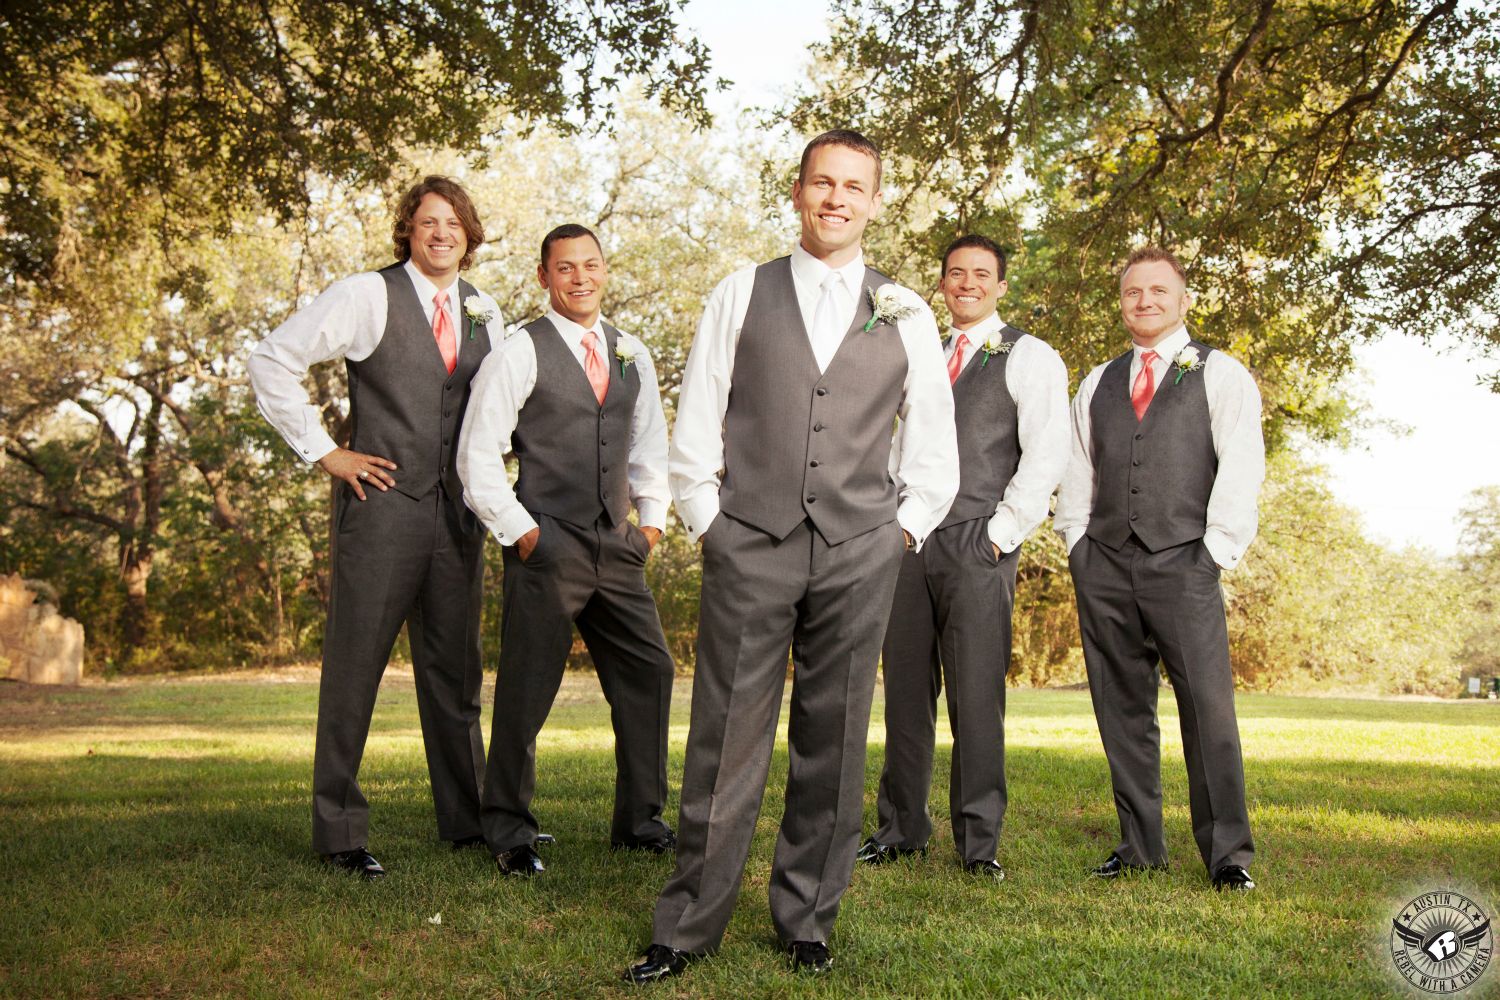 Great picture of happy groom and groomsmen in grey suit pants and vests with pink ties and white boutonnieres from Zuzu's Petals at Kindred Oaks wedding venue in Central Texas taken by Austin wedding photographer.